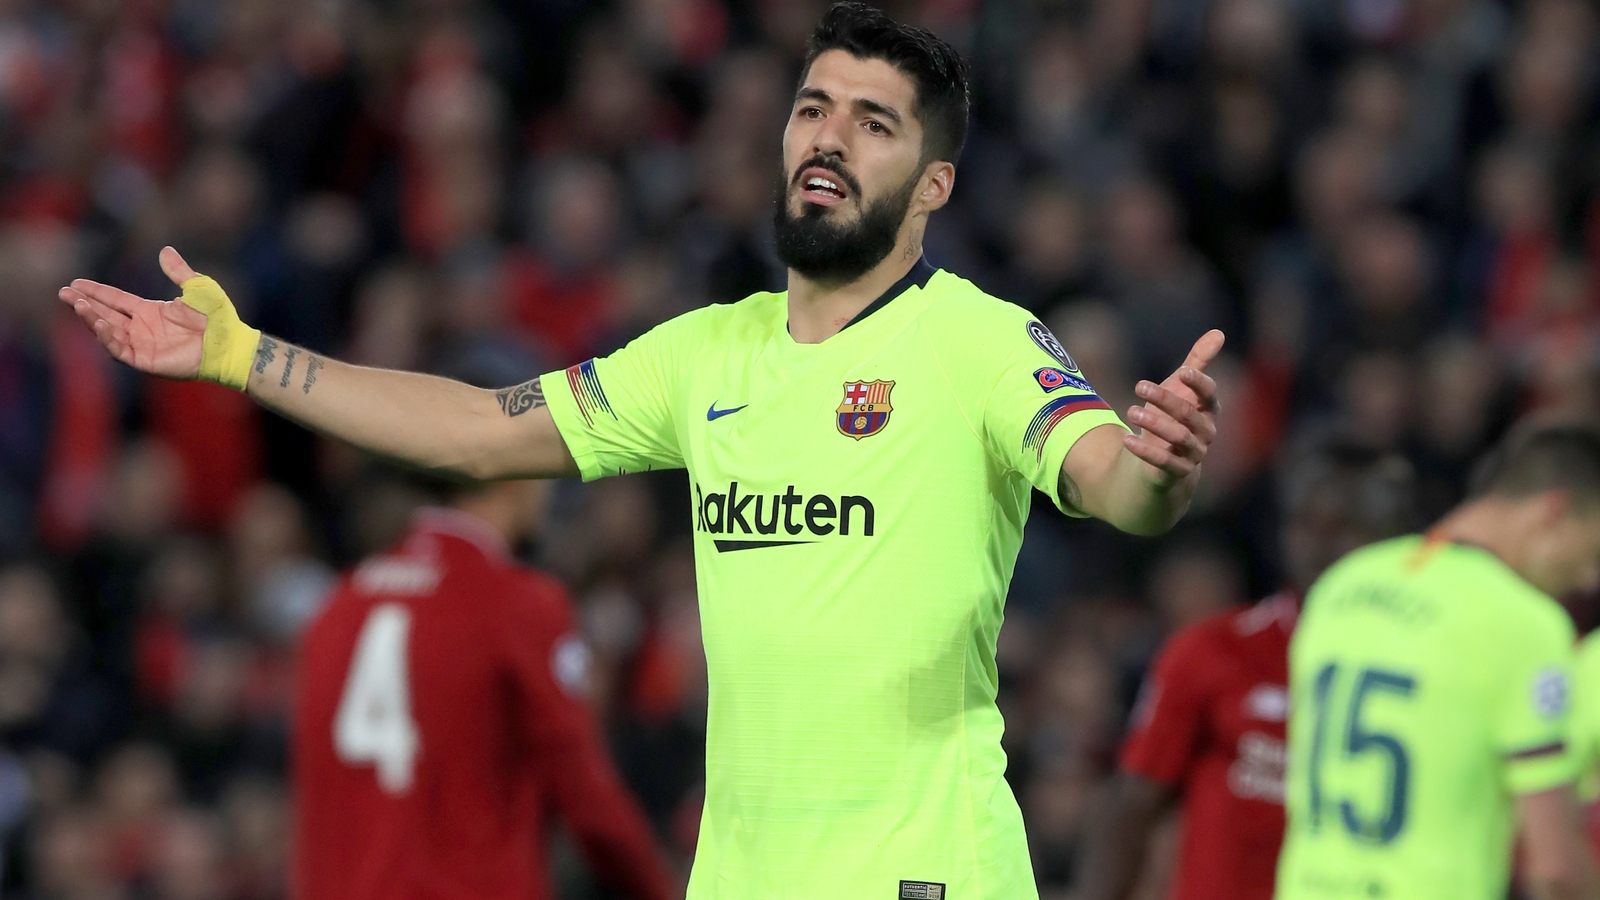 Luis Suarez has knee surgery after Anfield disaster